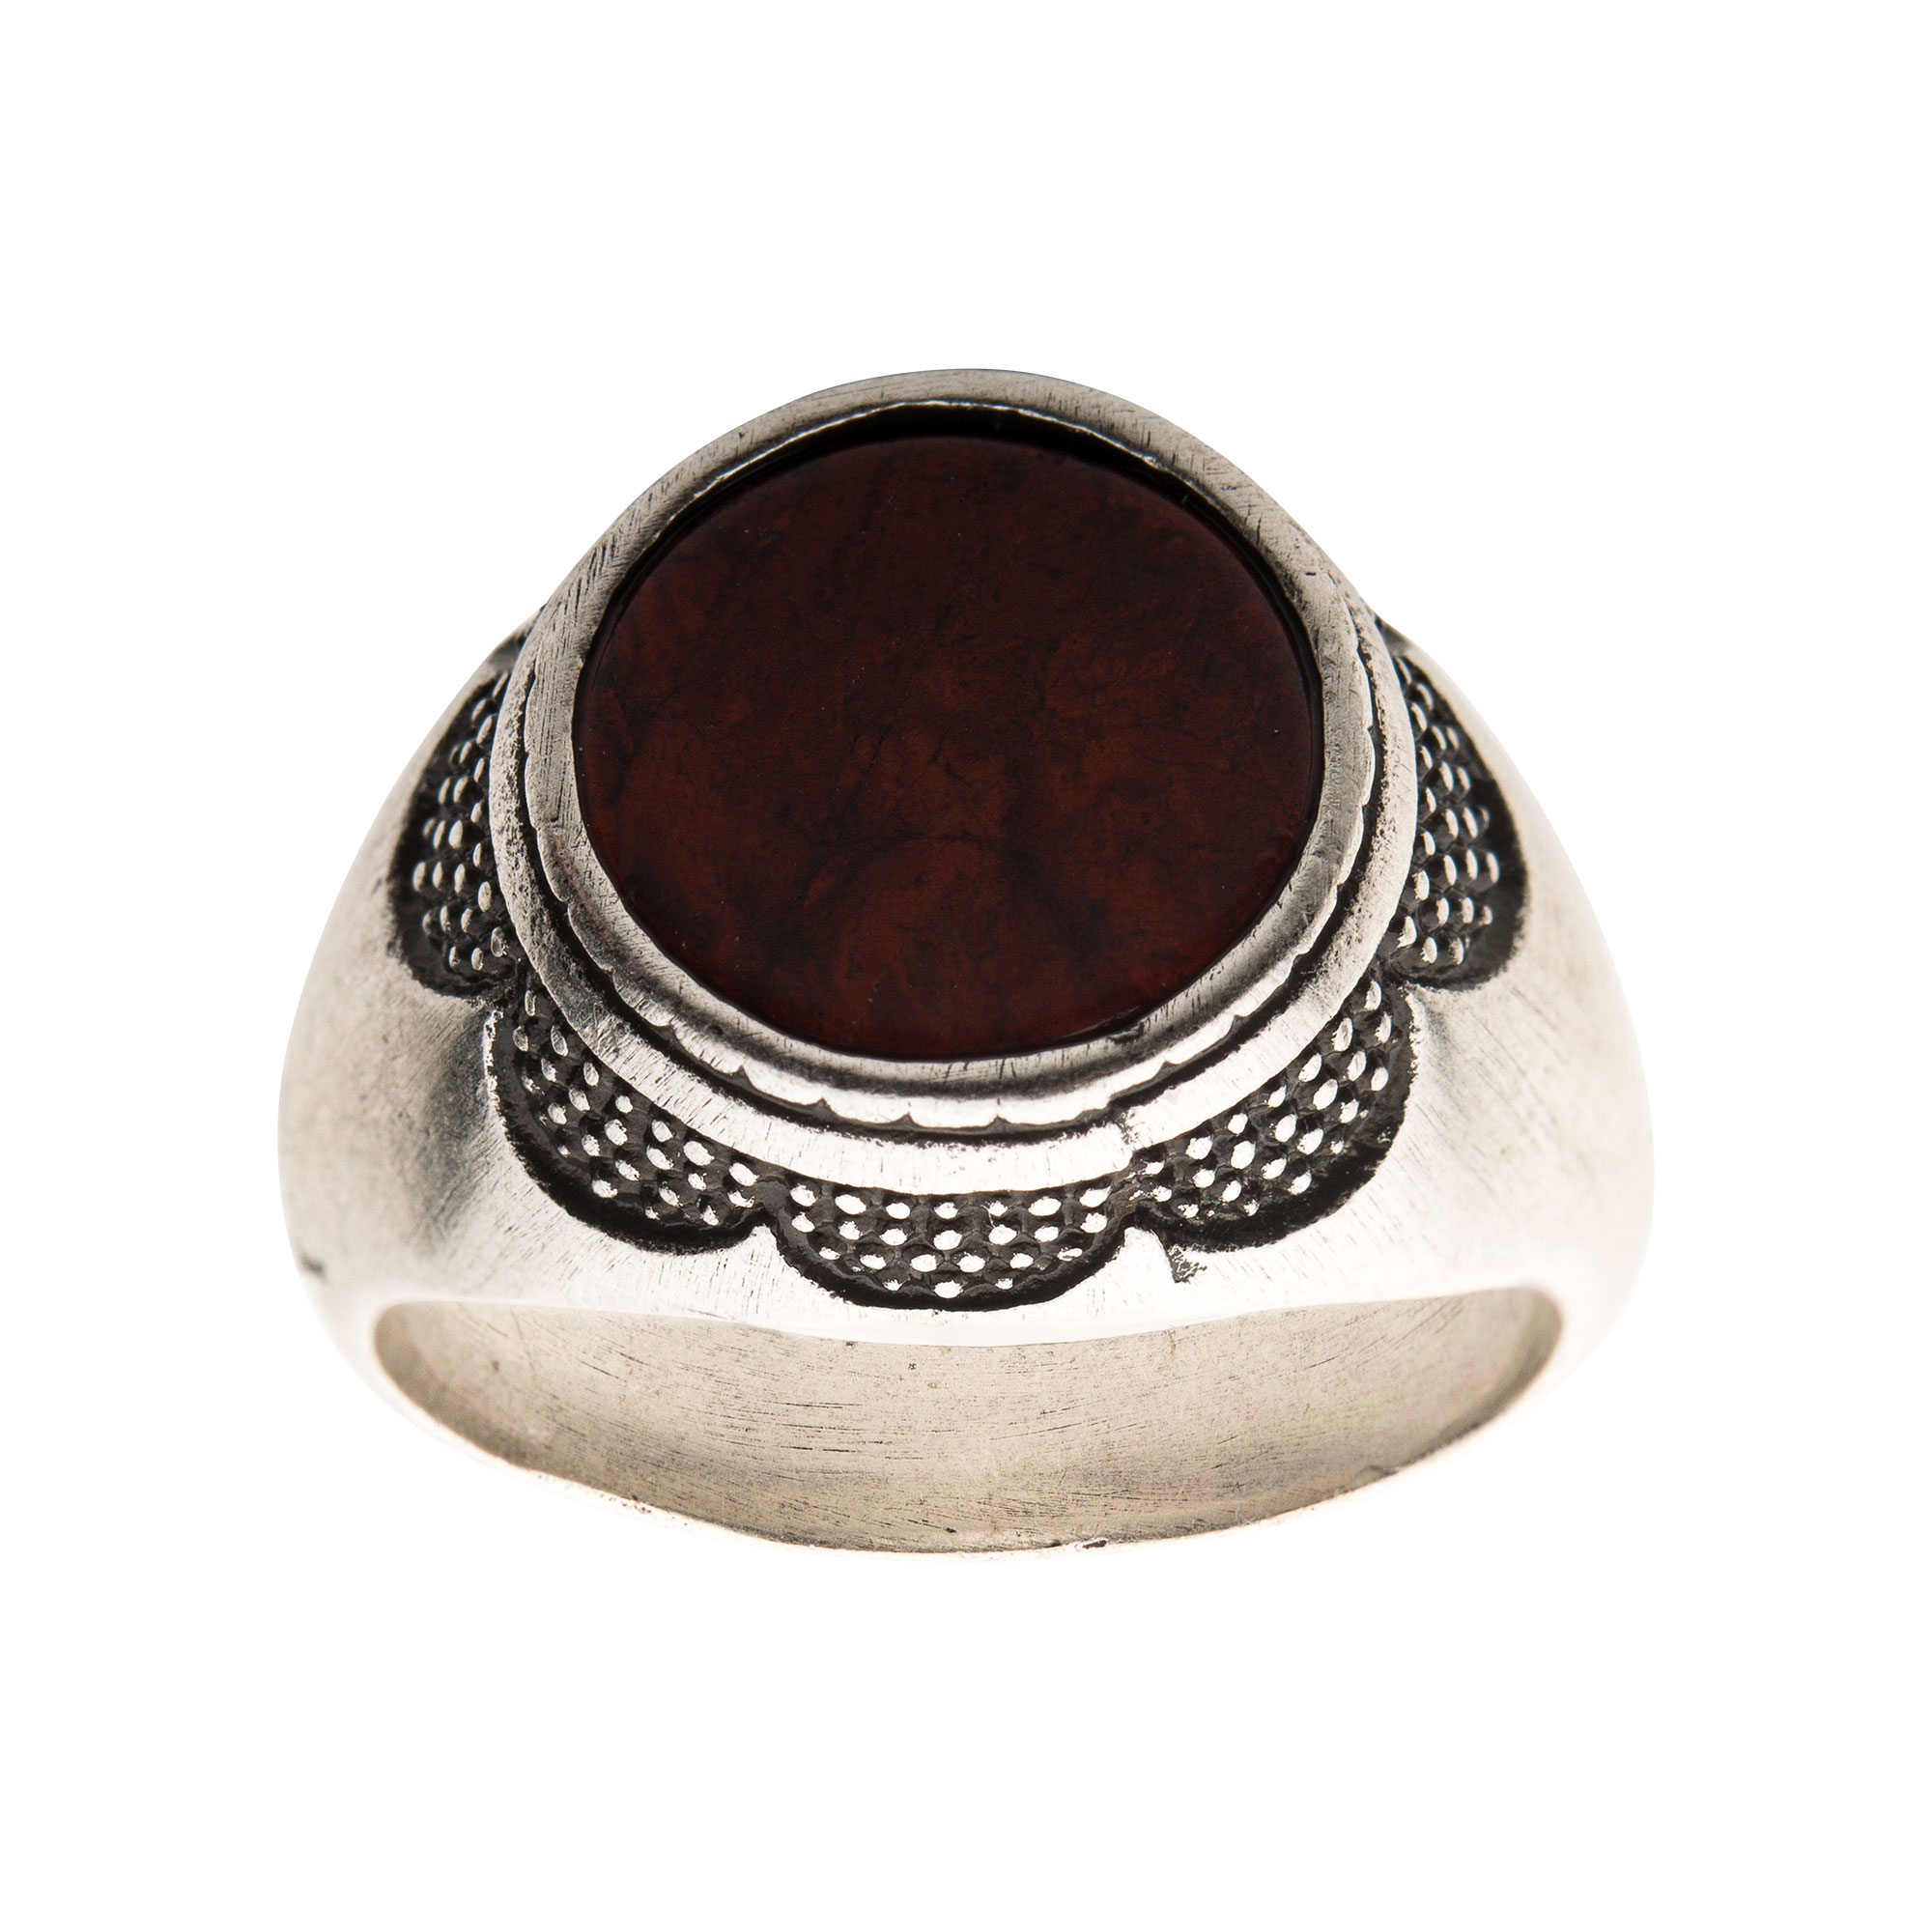 Stainless Steel Silver Plated with Red Jasper Stone Ring Image 2 Midtown Diamonds Reno, NV